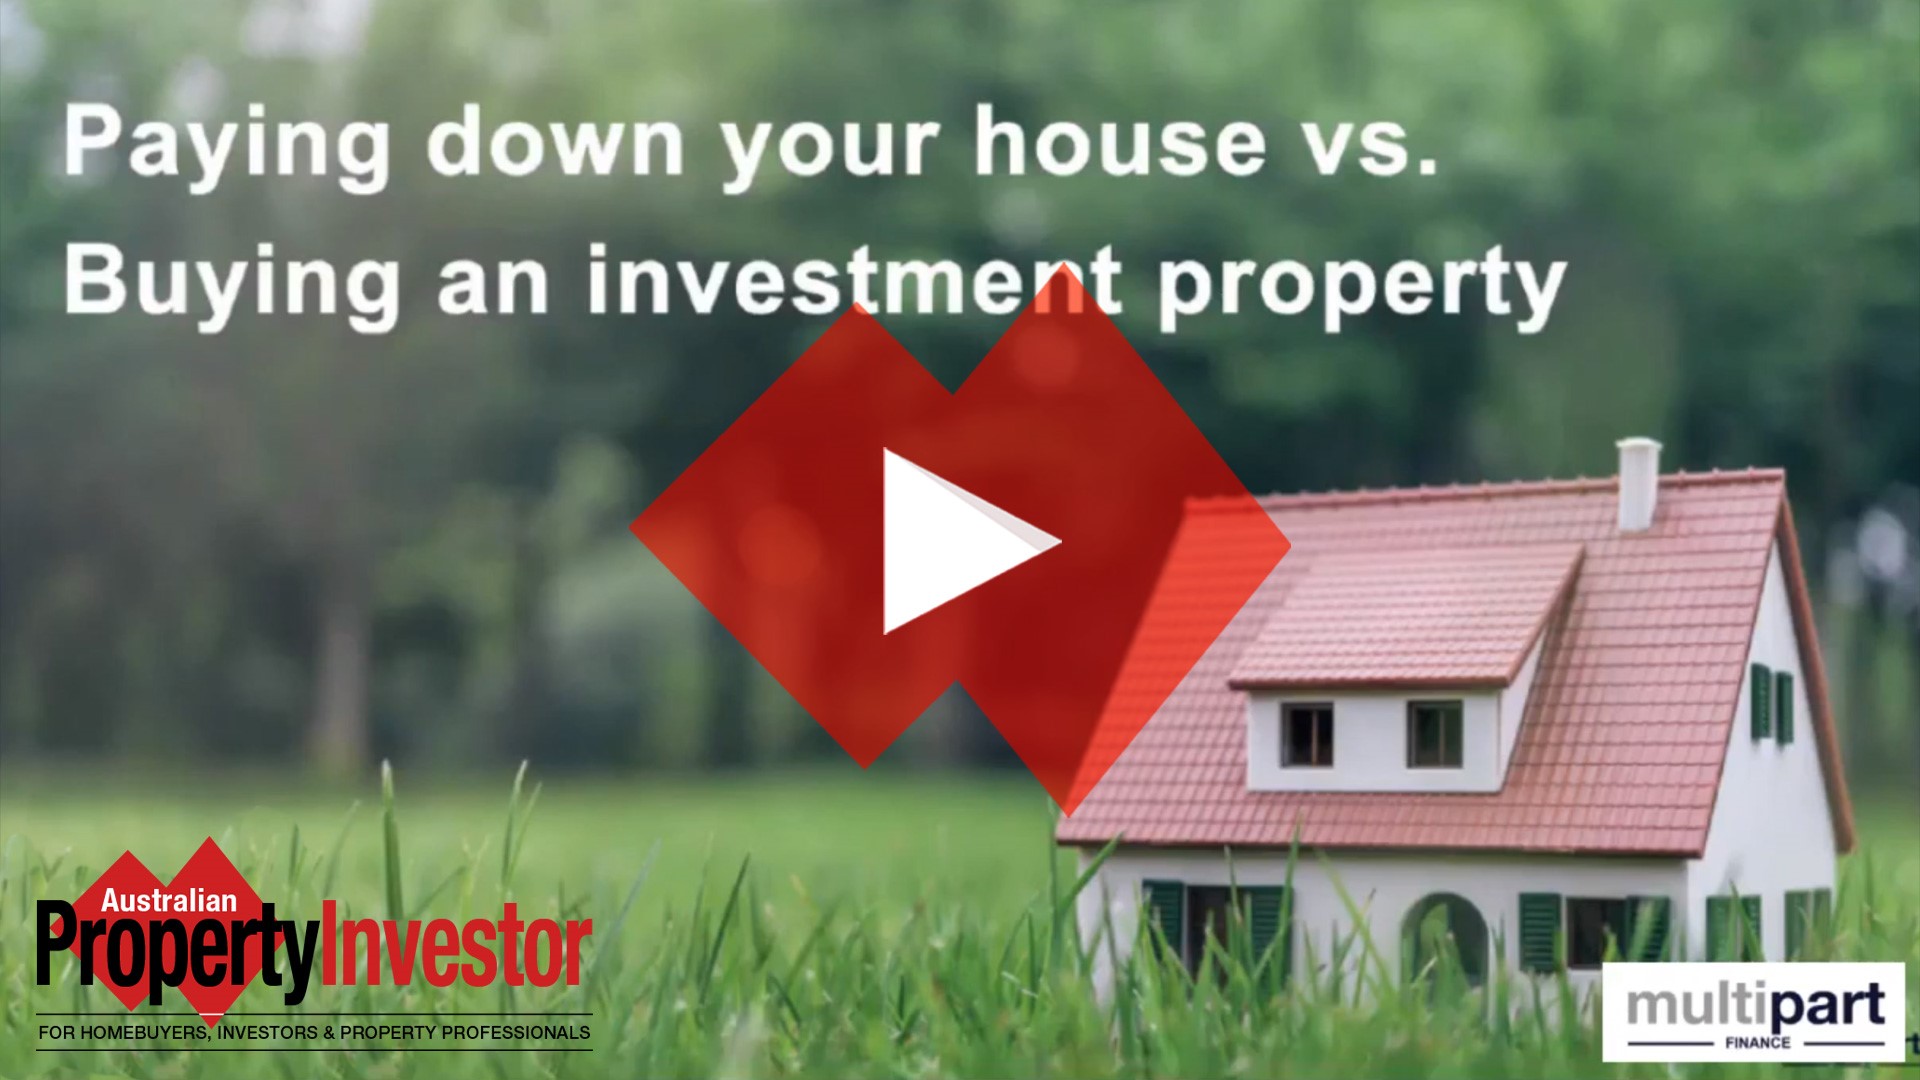 Pay Off Your Home Or Buy An Investment?